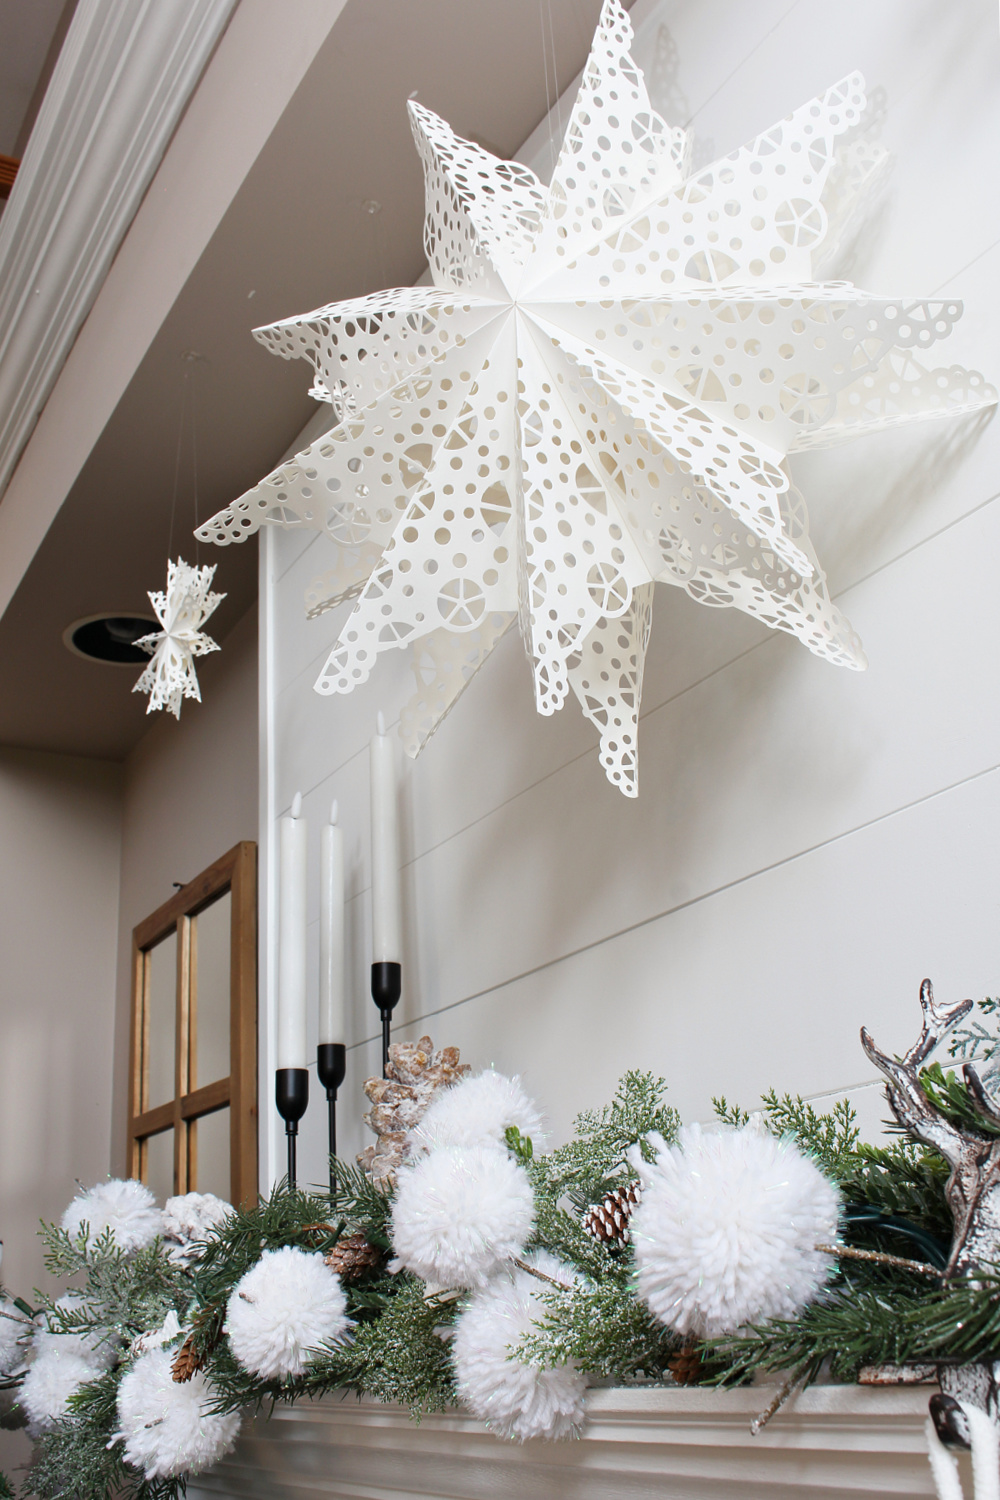 Winter wonderland Christmas mantel with pom pom snowball garland and paper snowflakes.